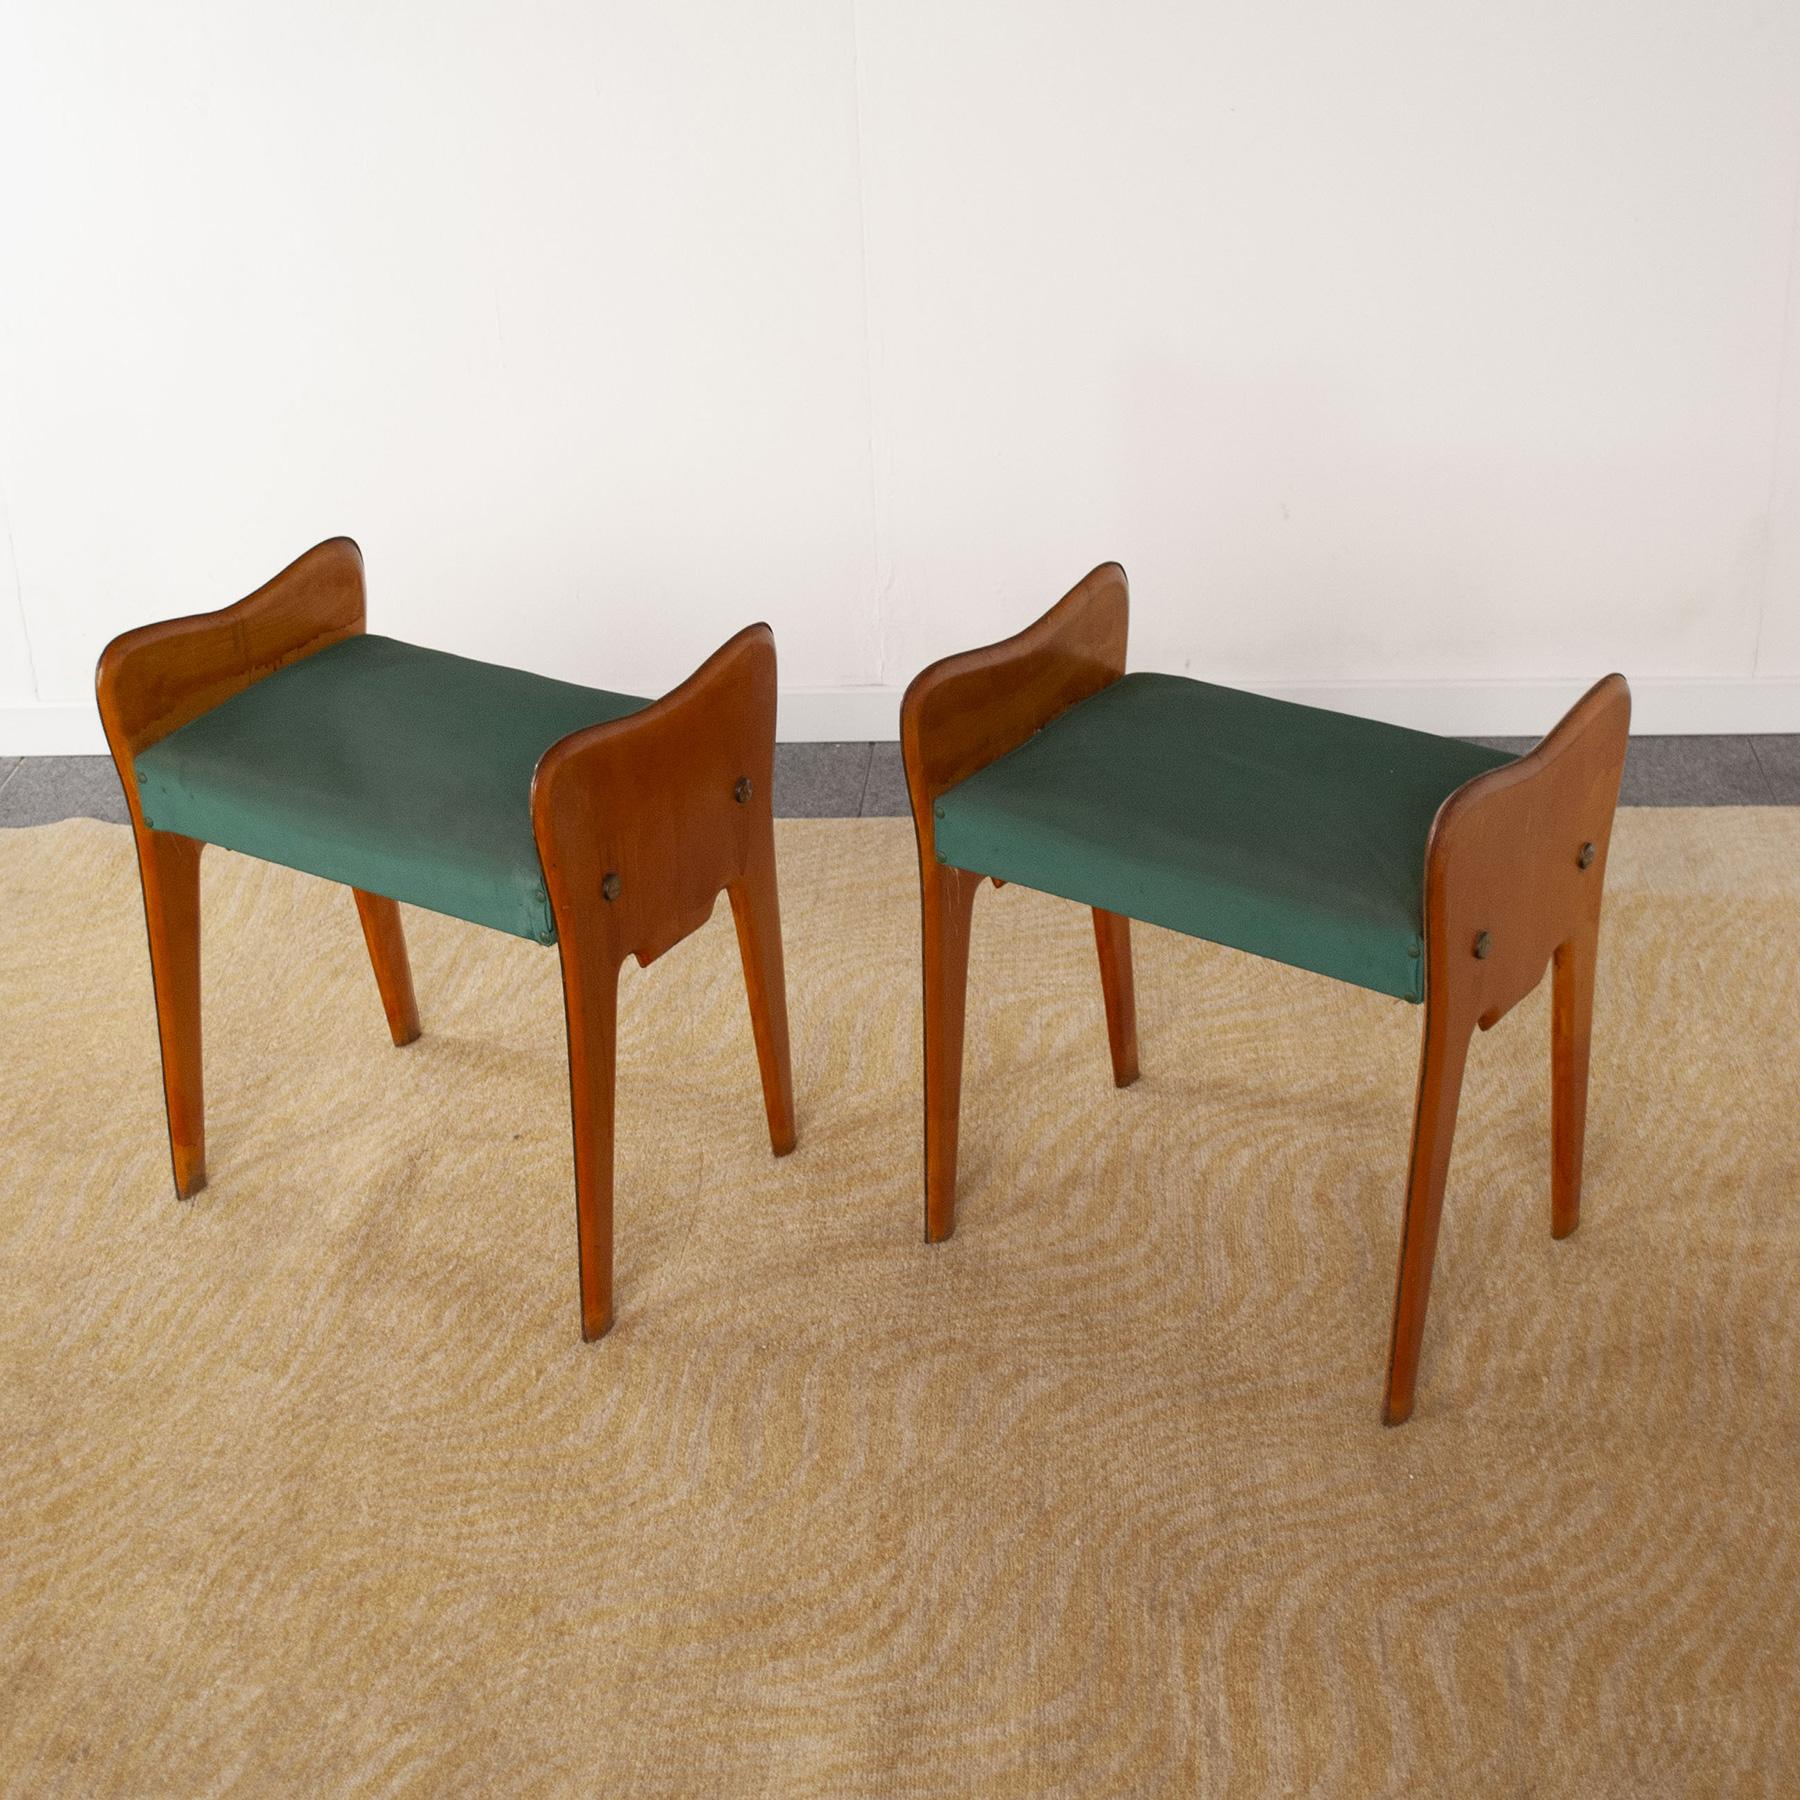 Brass Italian Mid-Century Pair of Wooden Benches from the 1950s For Sale